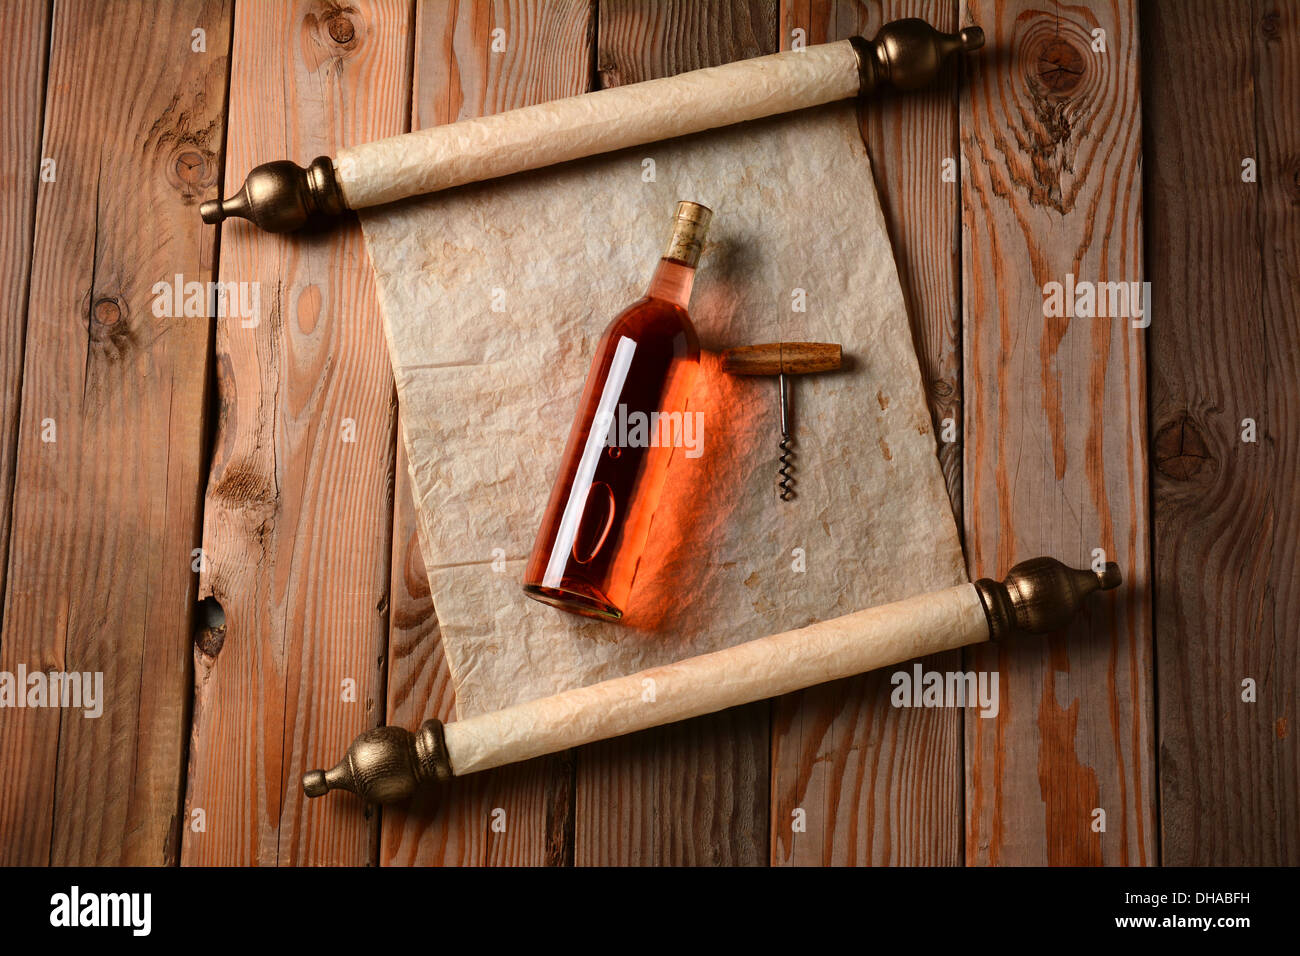 A bottle of blush wine and corkscrew laying on a scroll of parchment paper on a rustic wooden floor. Stock Photo